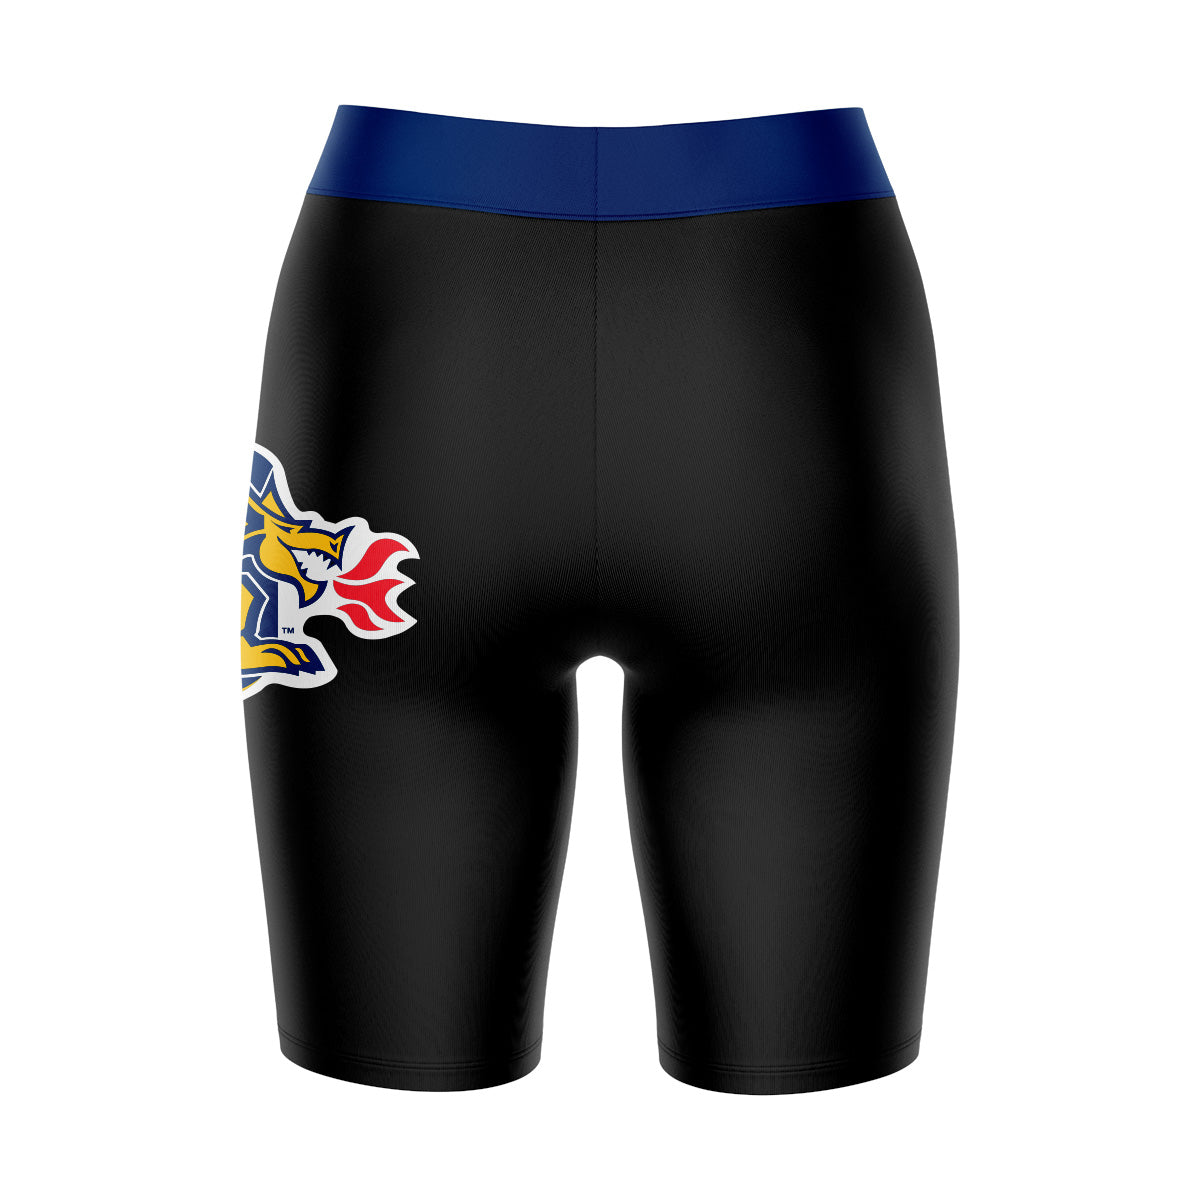 Drexel Dragon Vive La Fete Game Day Logo on Thigh and Waistband Black and Blue Women Bike Short 9 Inseam"